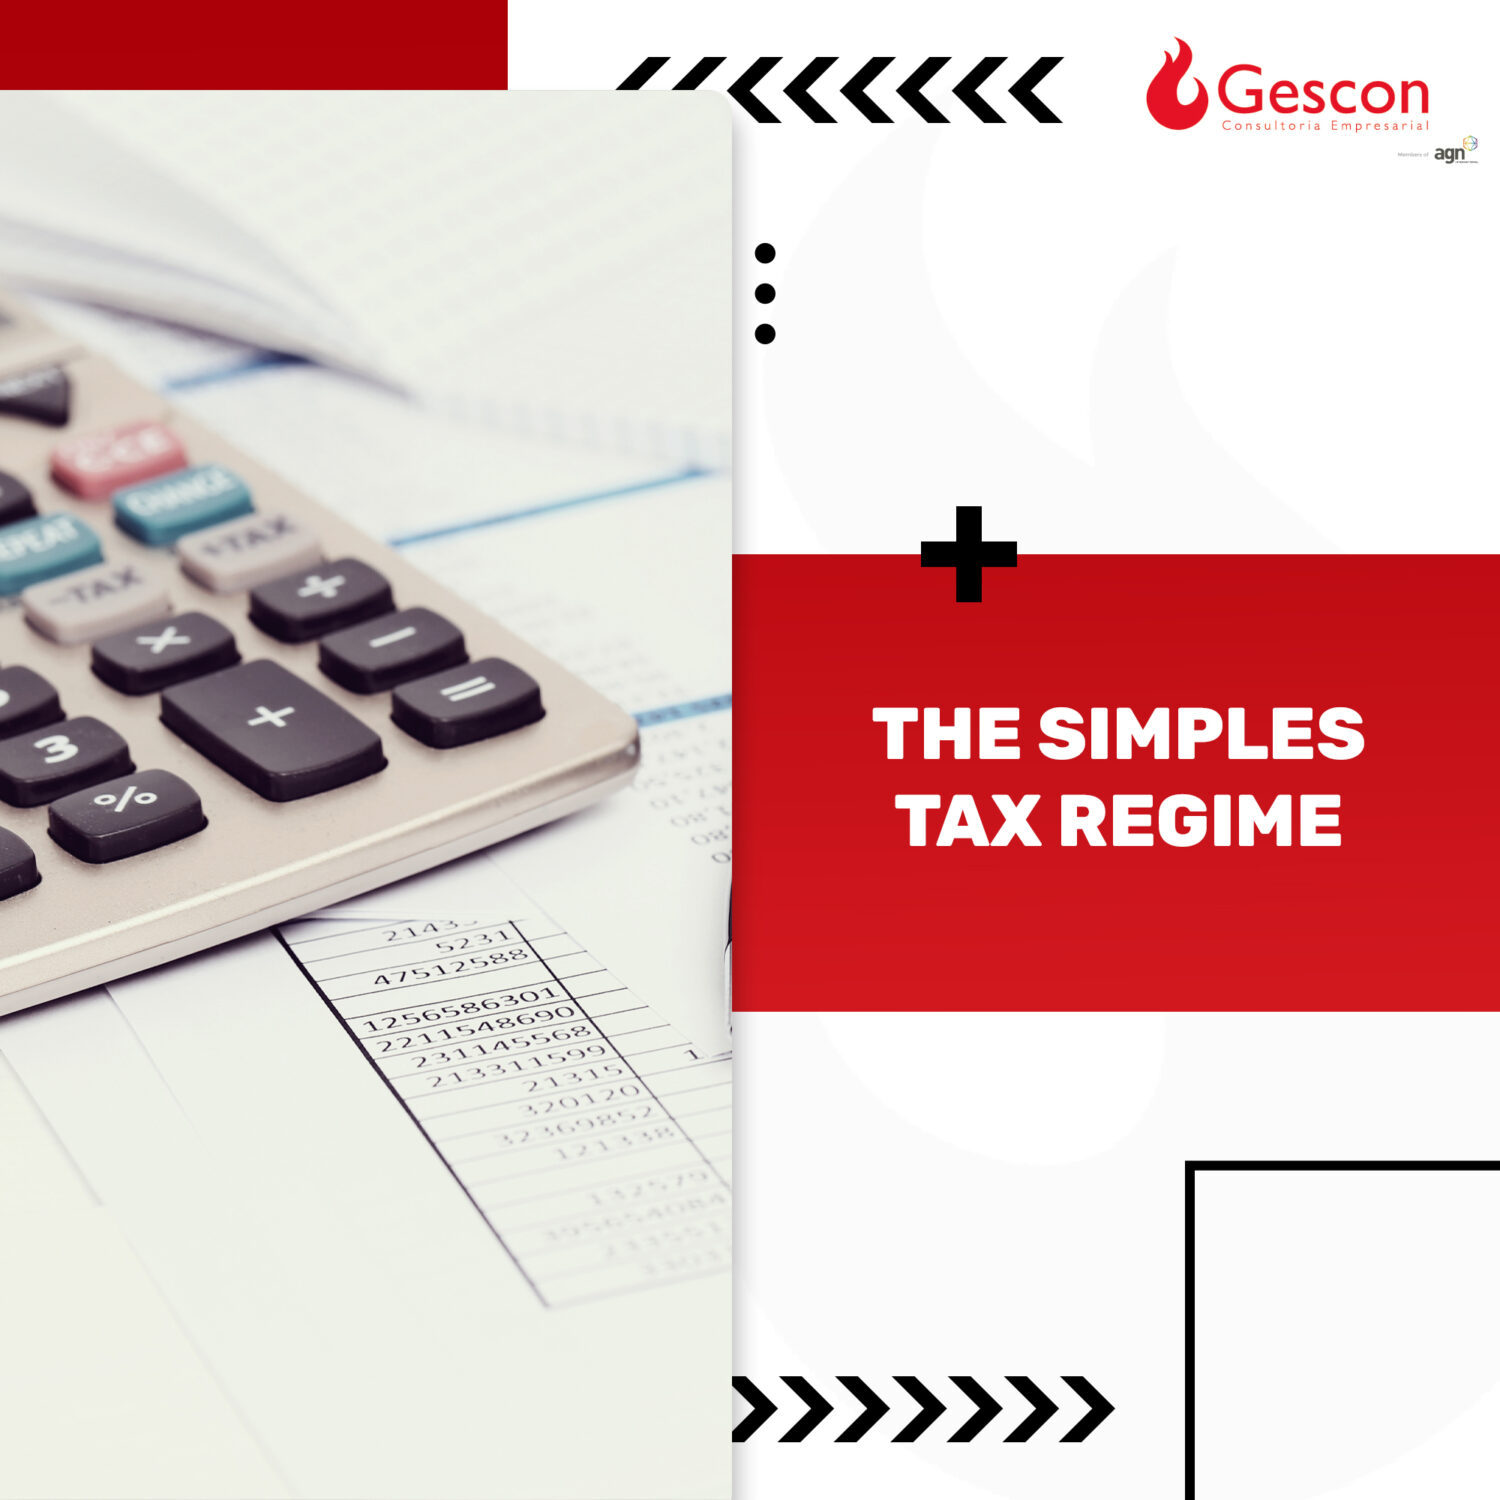 The SIMPLES tax regime